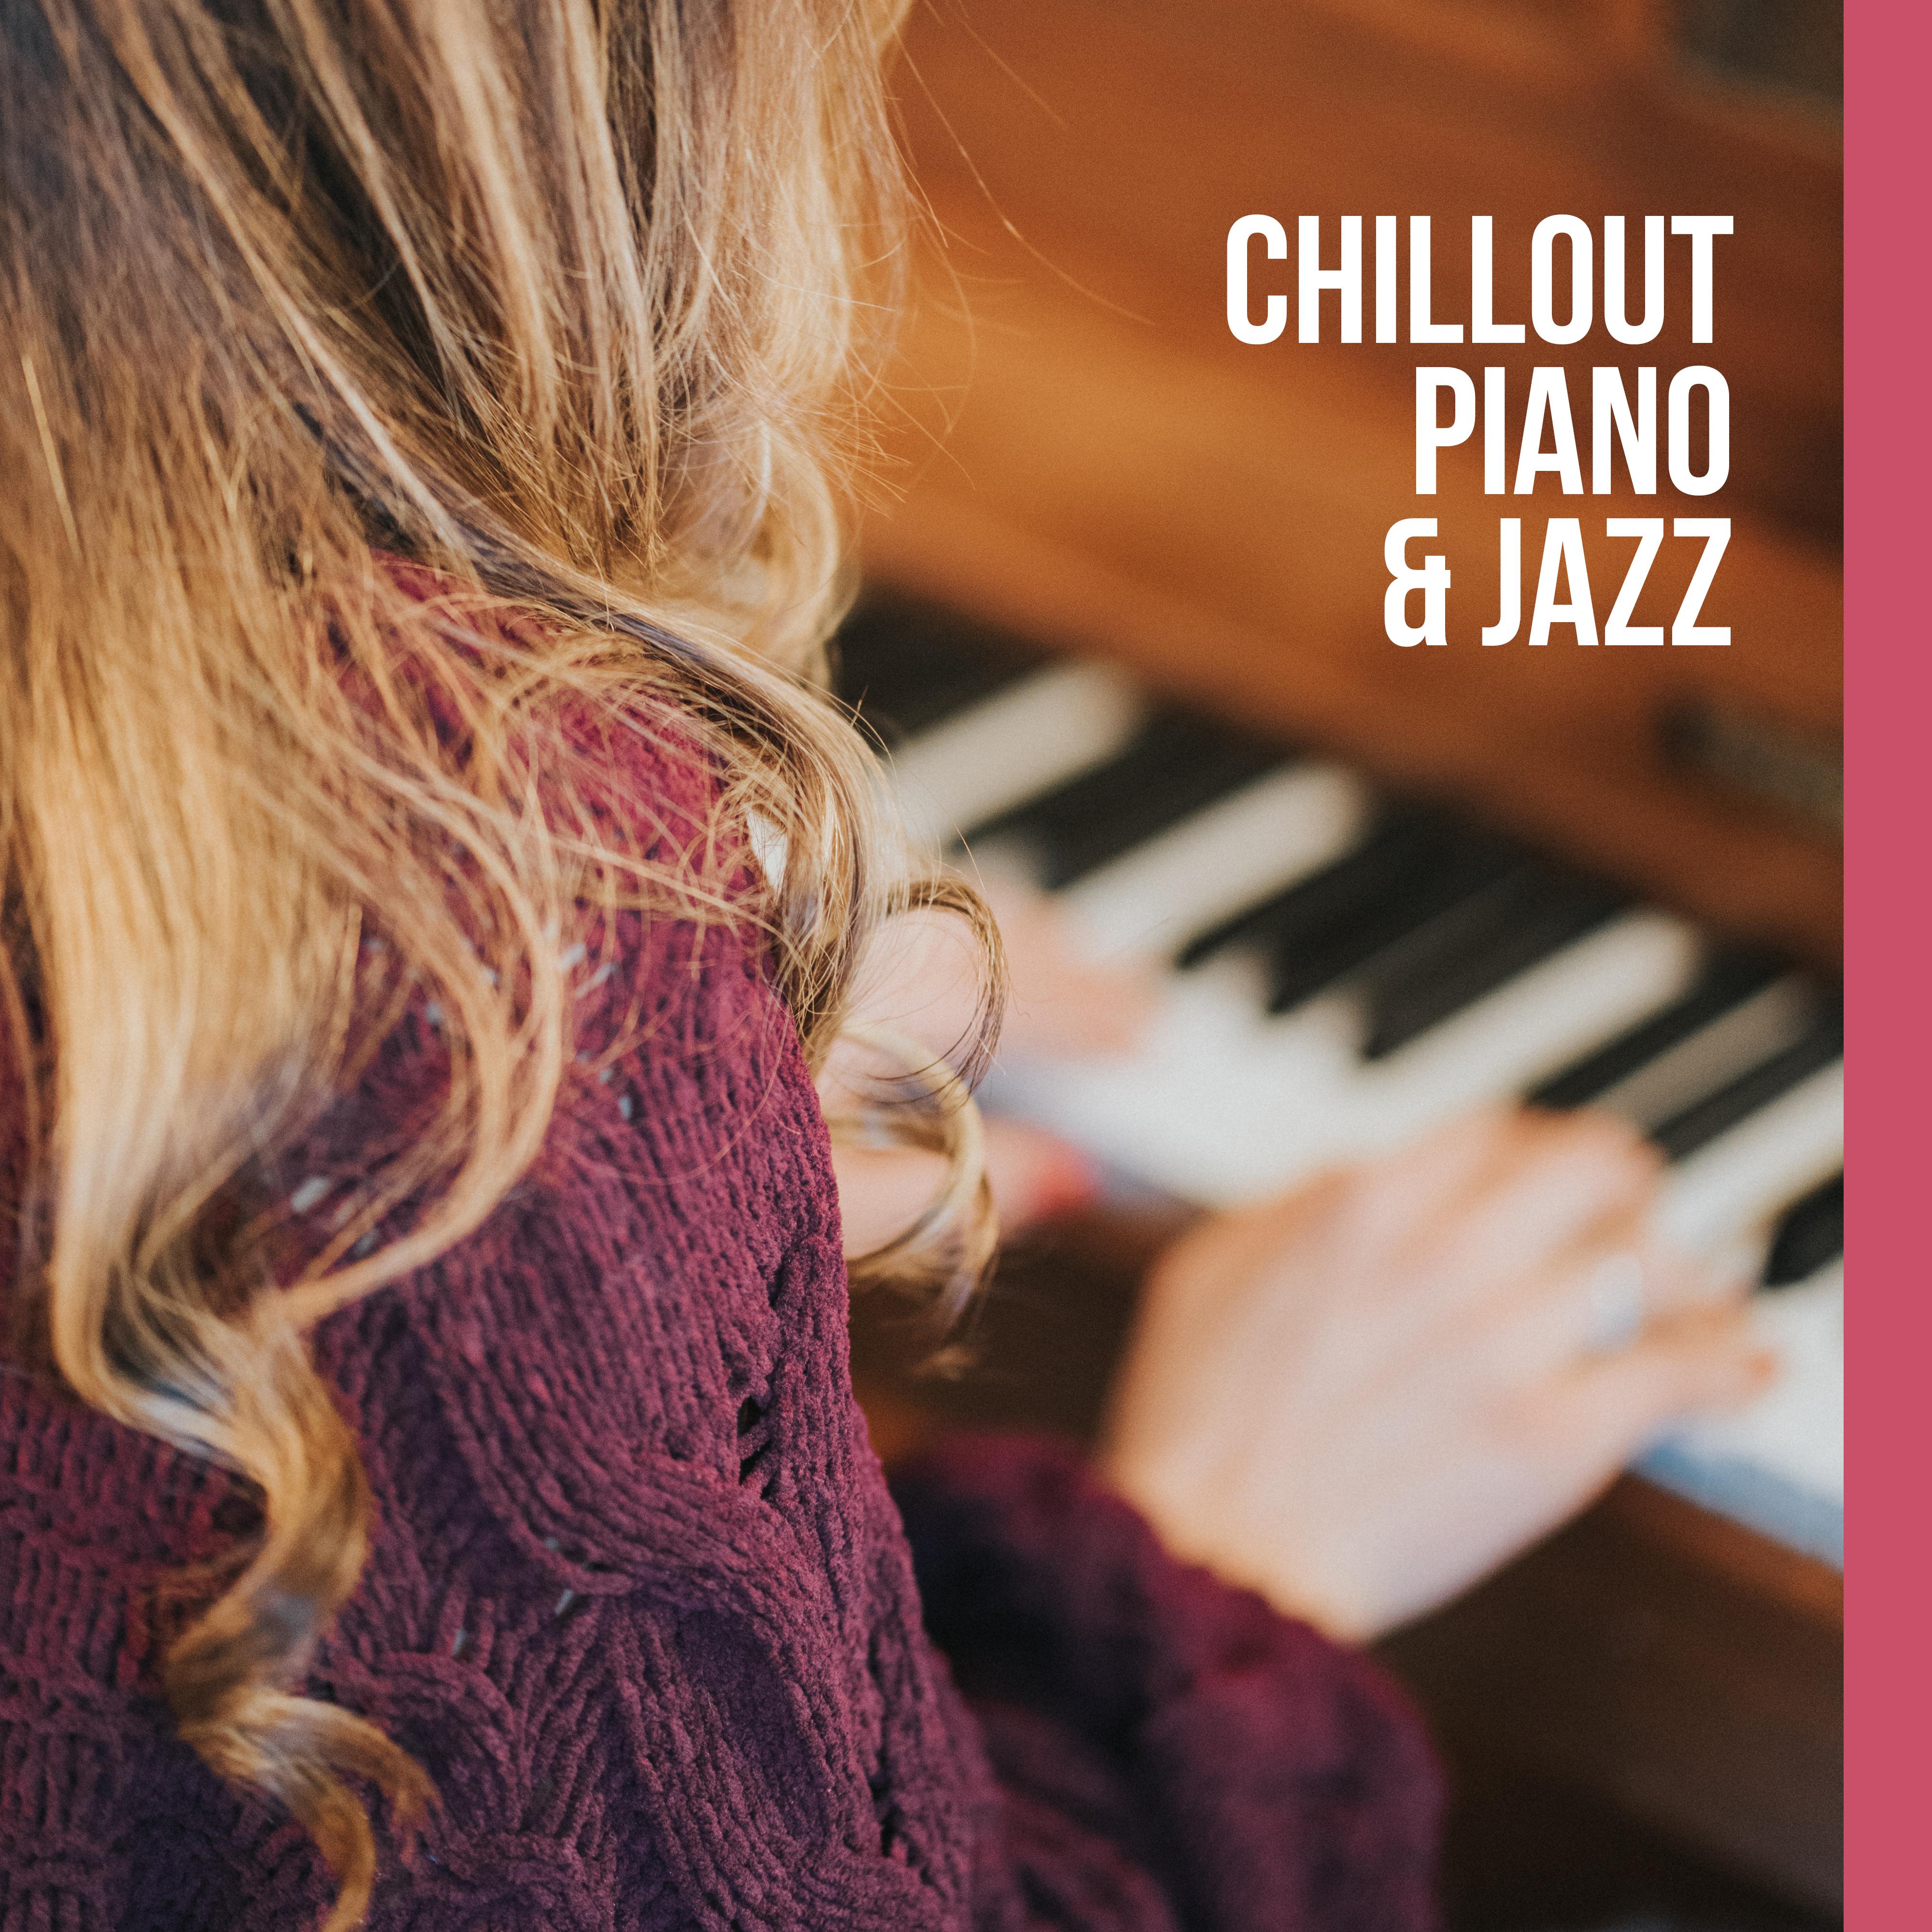 Chillout Piano  Jazz  Soft Jazz, Relaxing Jazz Vibes, Piano Music, Mellow Jazz After Work, Instrumental Jazz Music Ambient